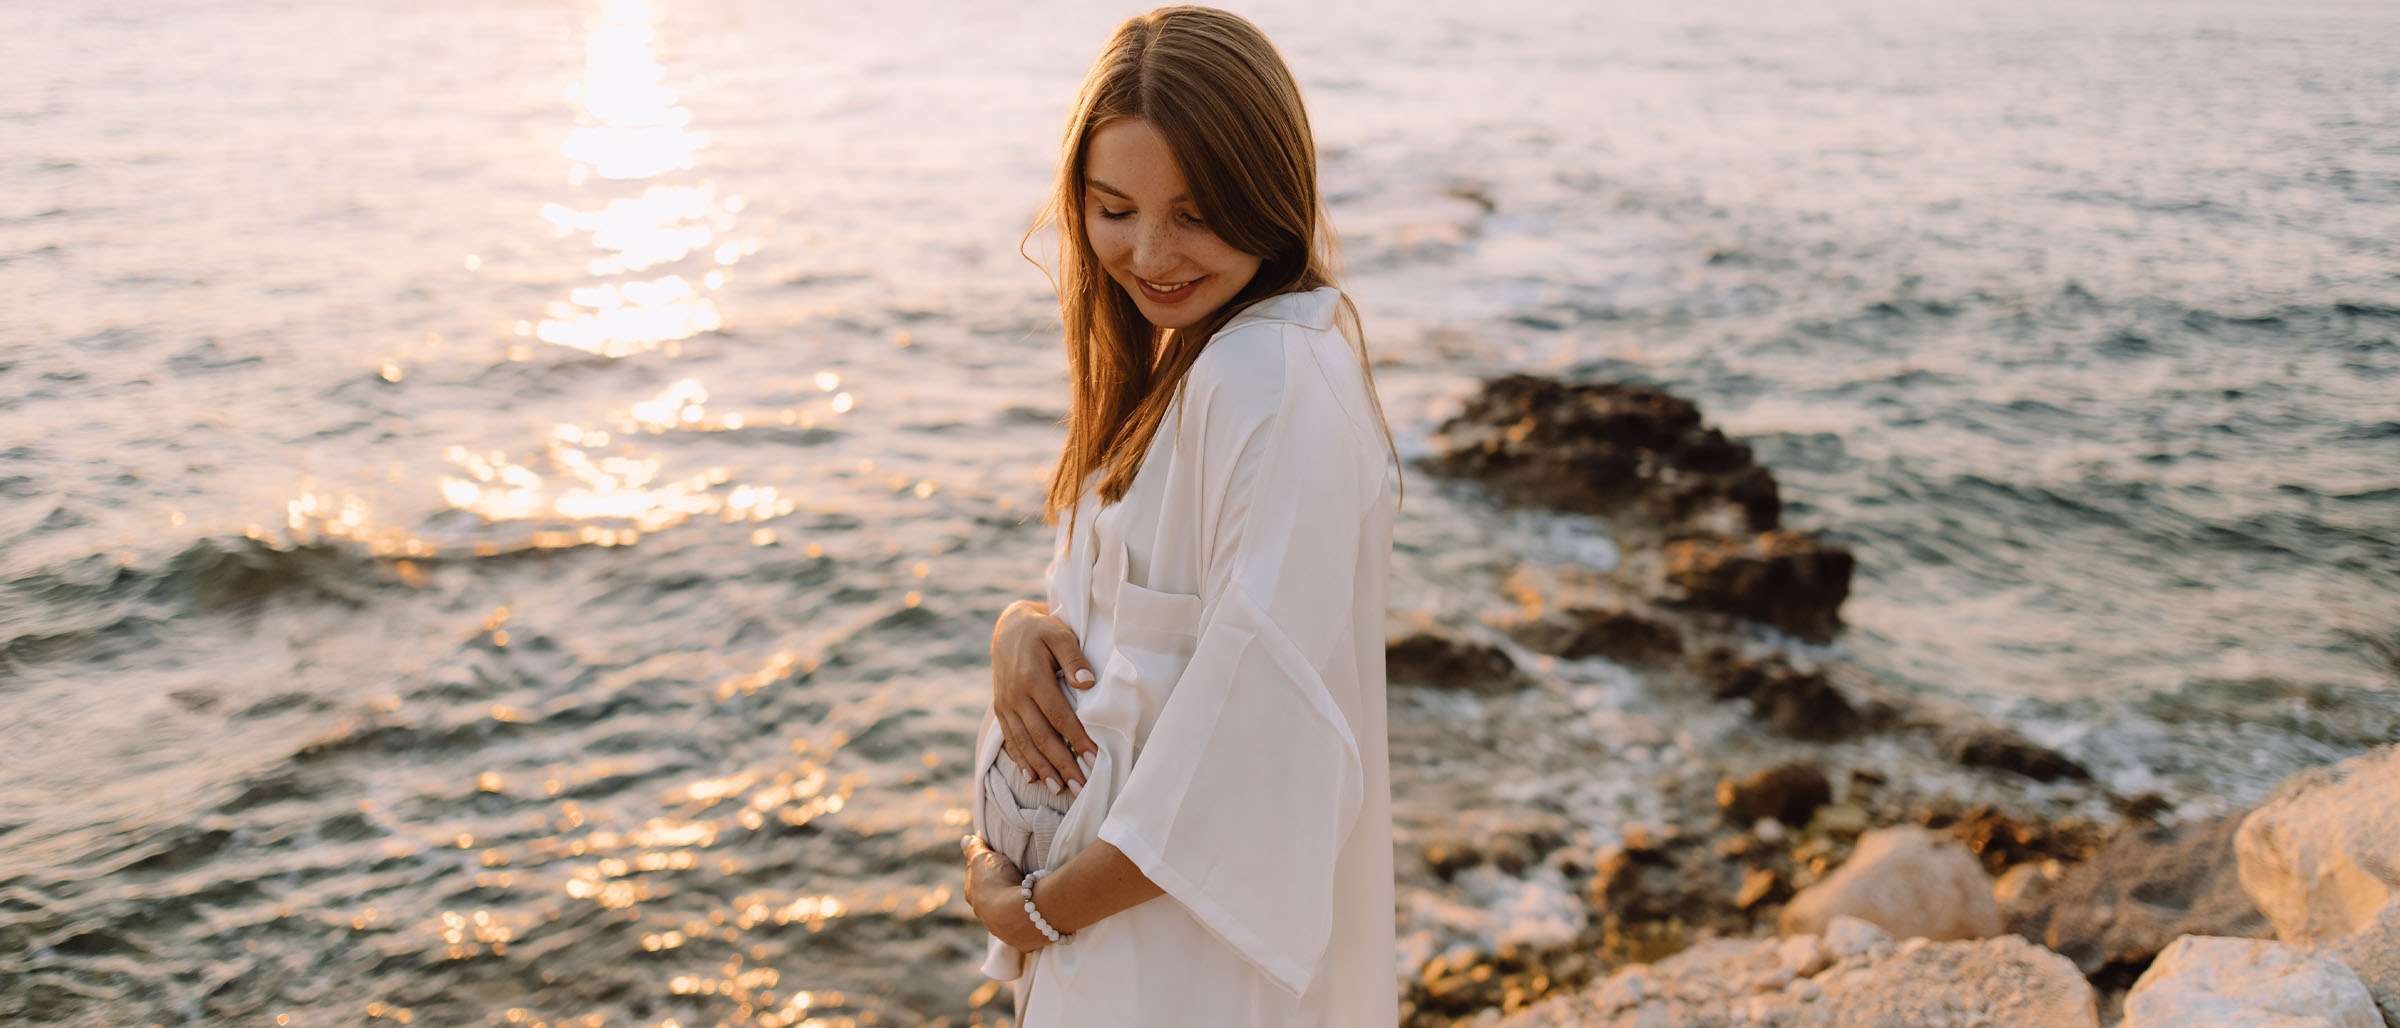 How can A Pregnant Woman Benefit from the Sun without Any Harm?